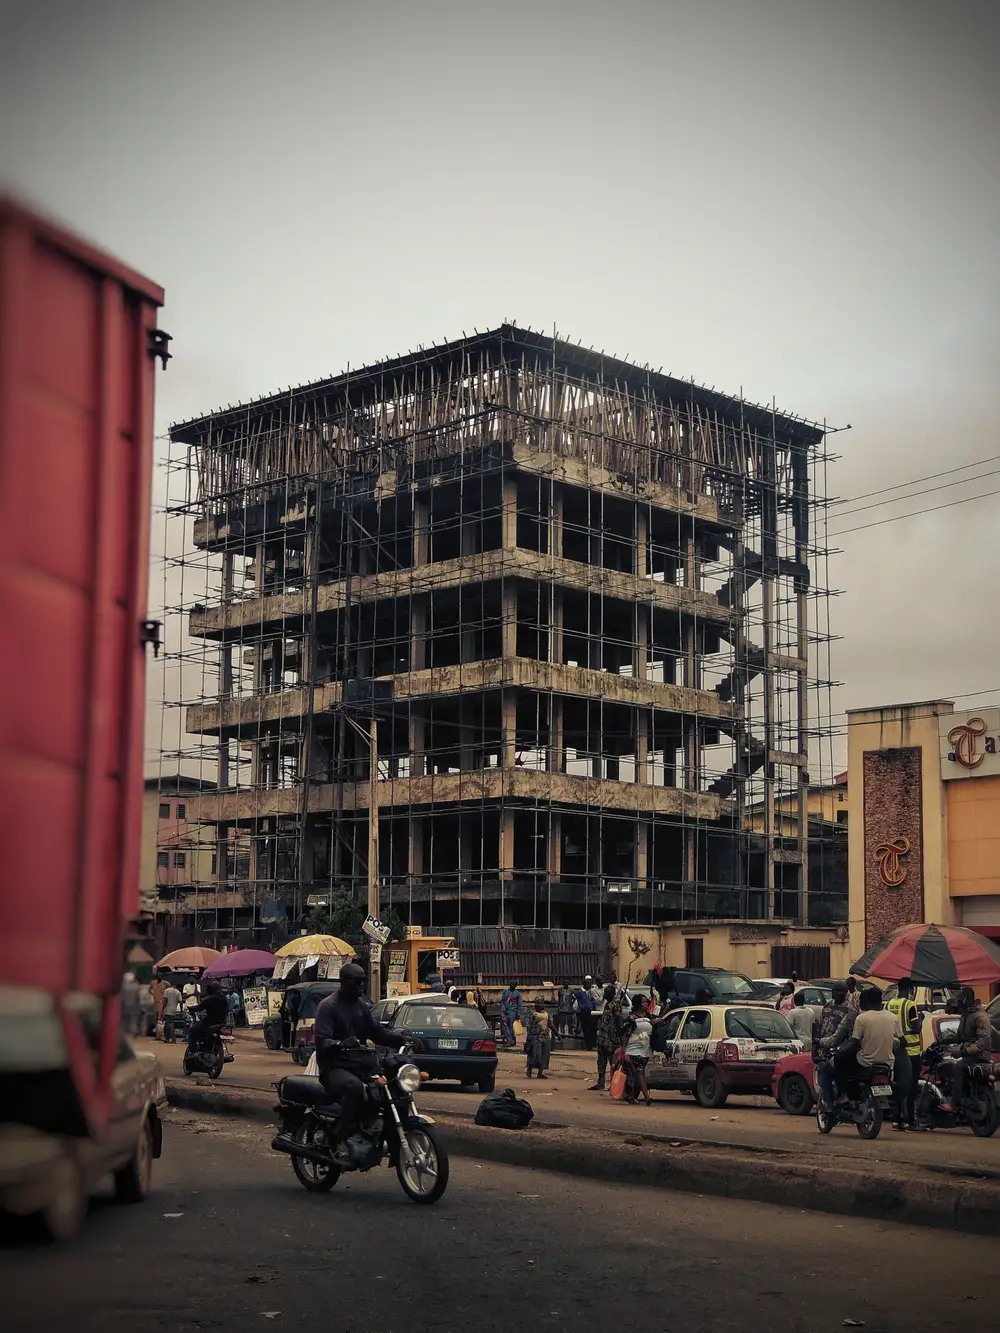 An uncompleted building